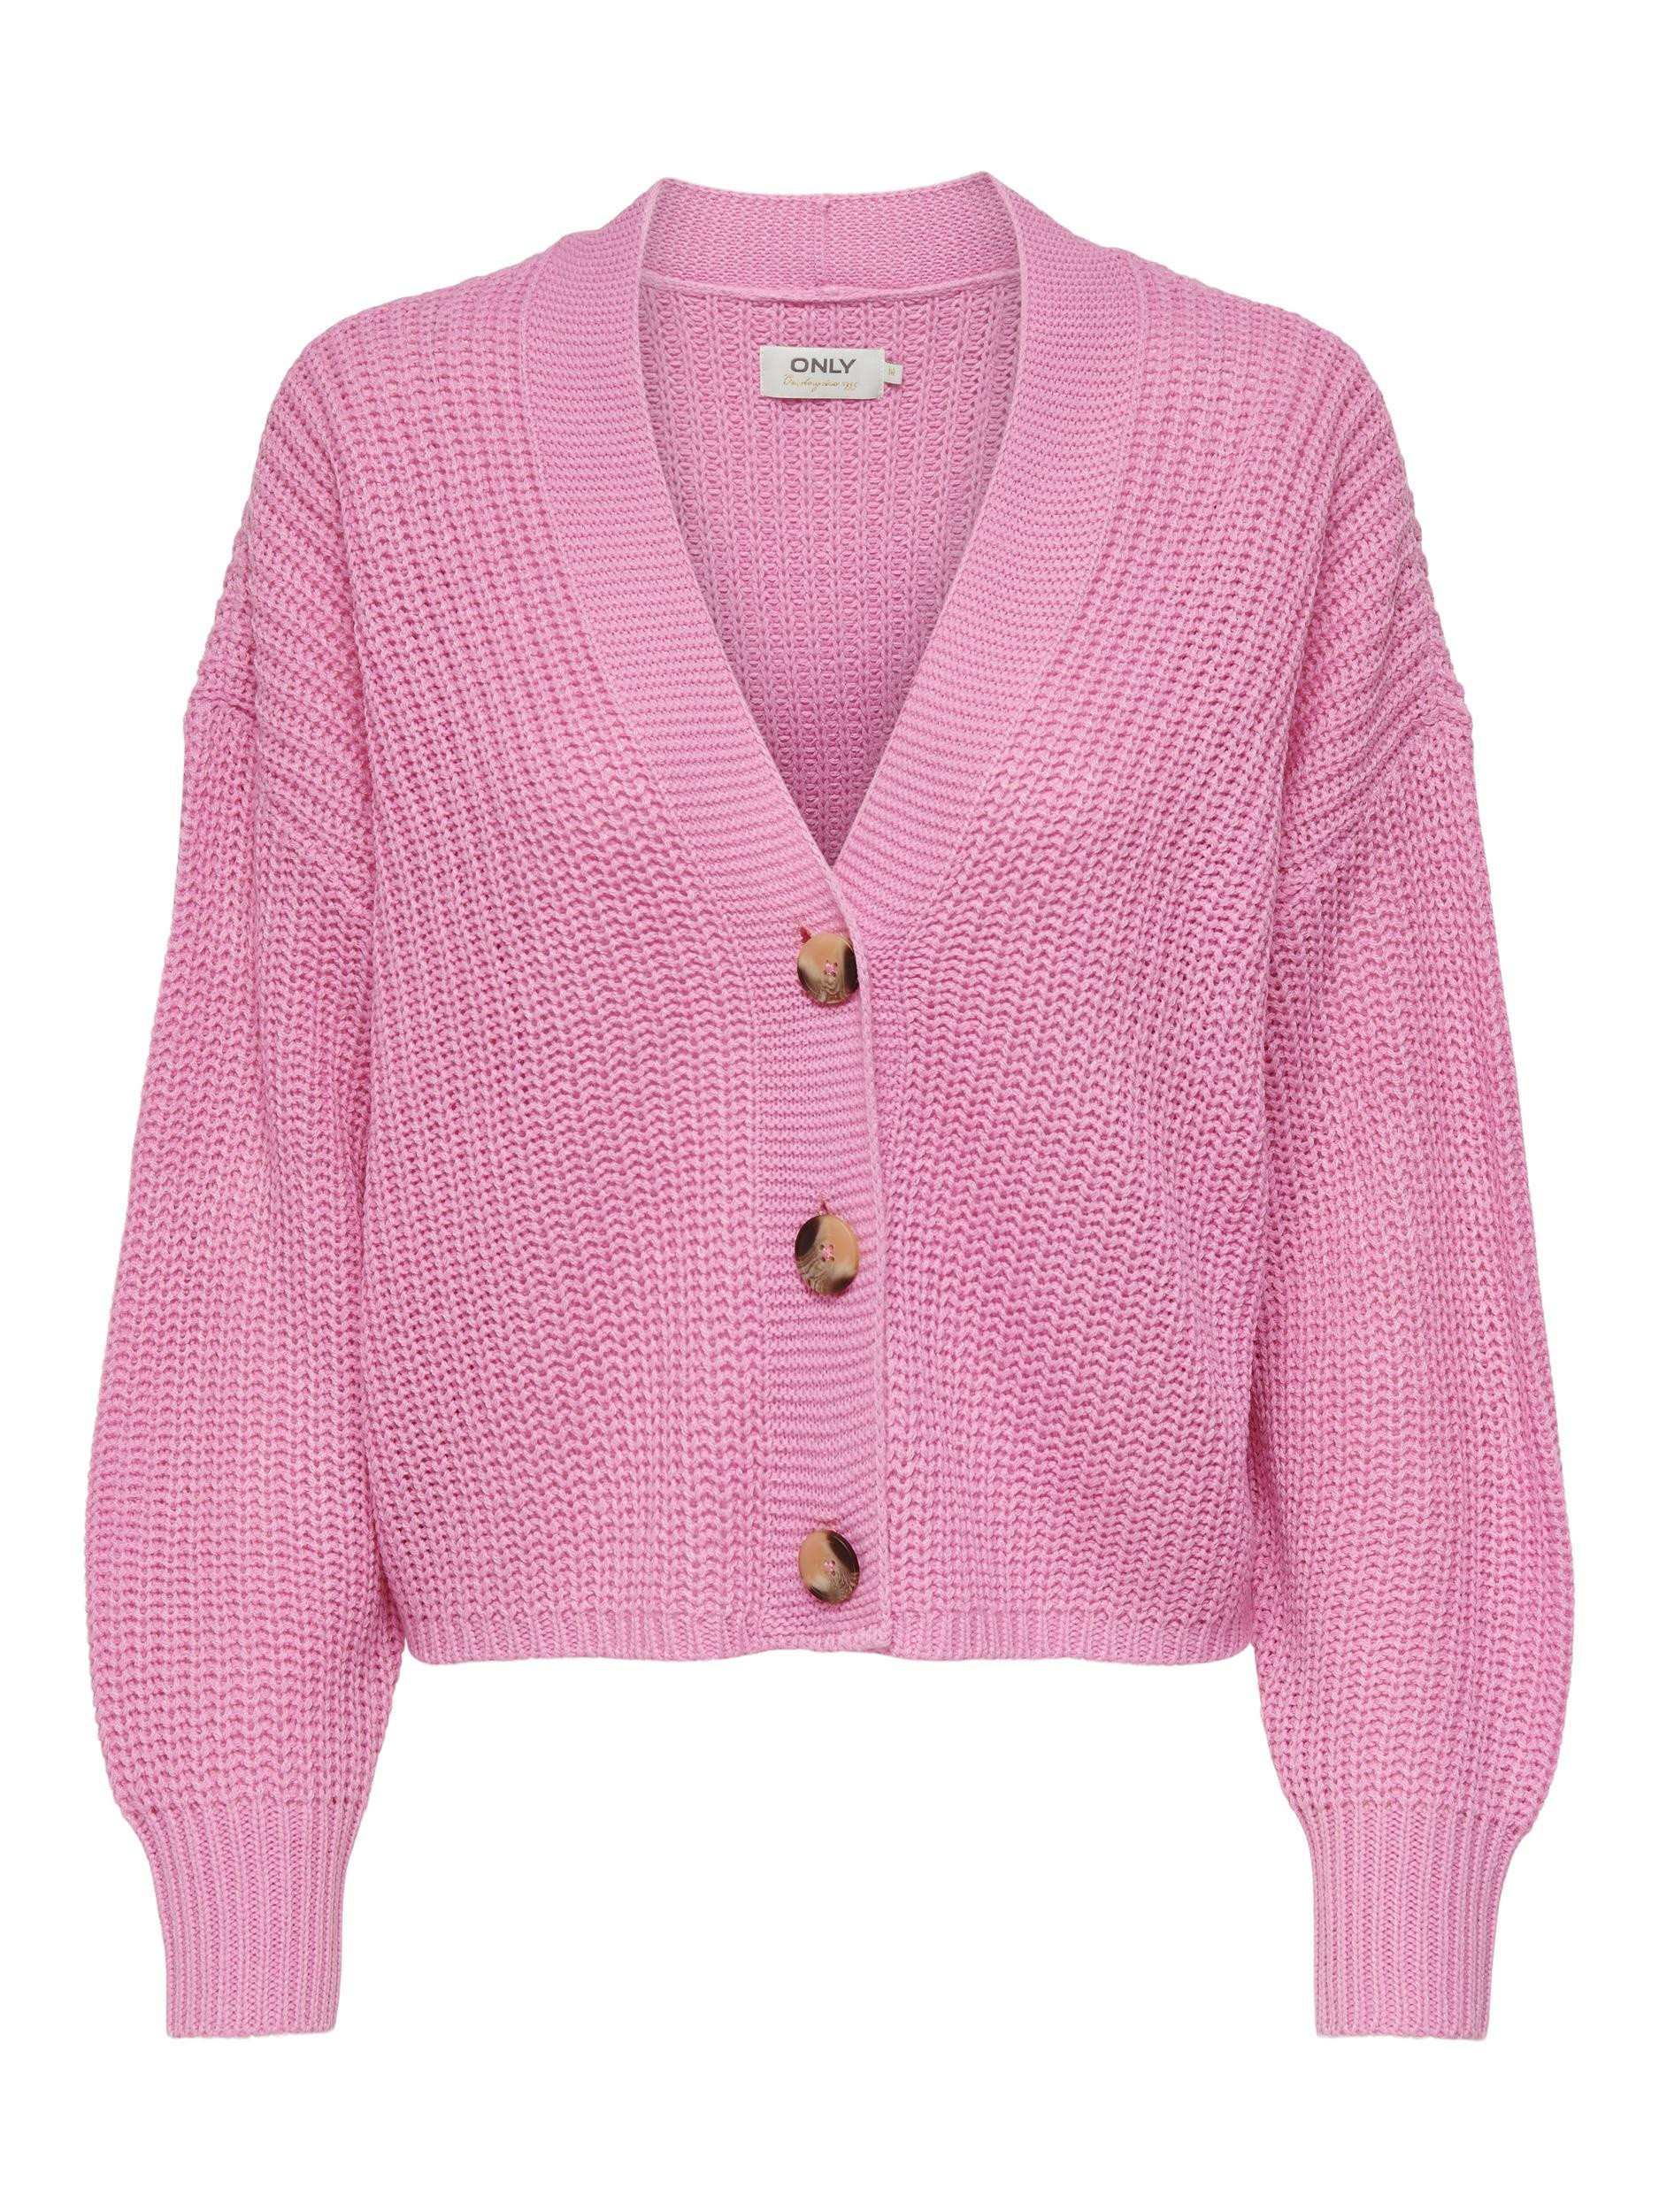 Only - Cardigan in maglia, Rosa fenicottero, large image number 0